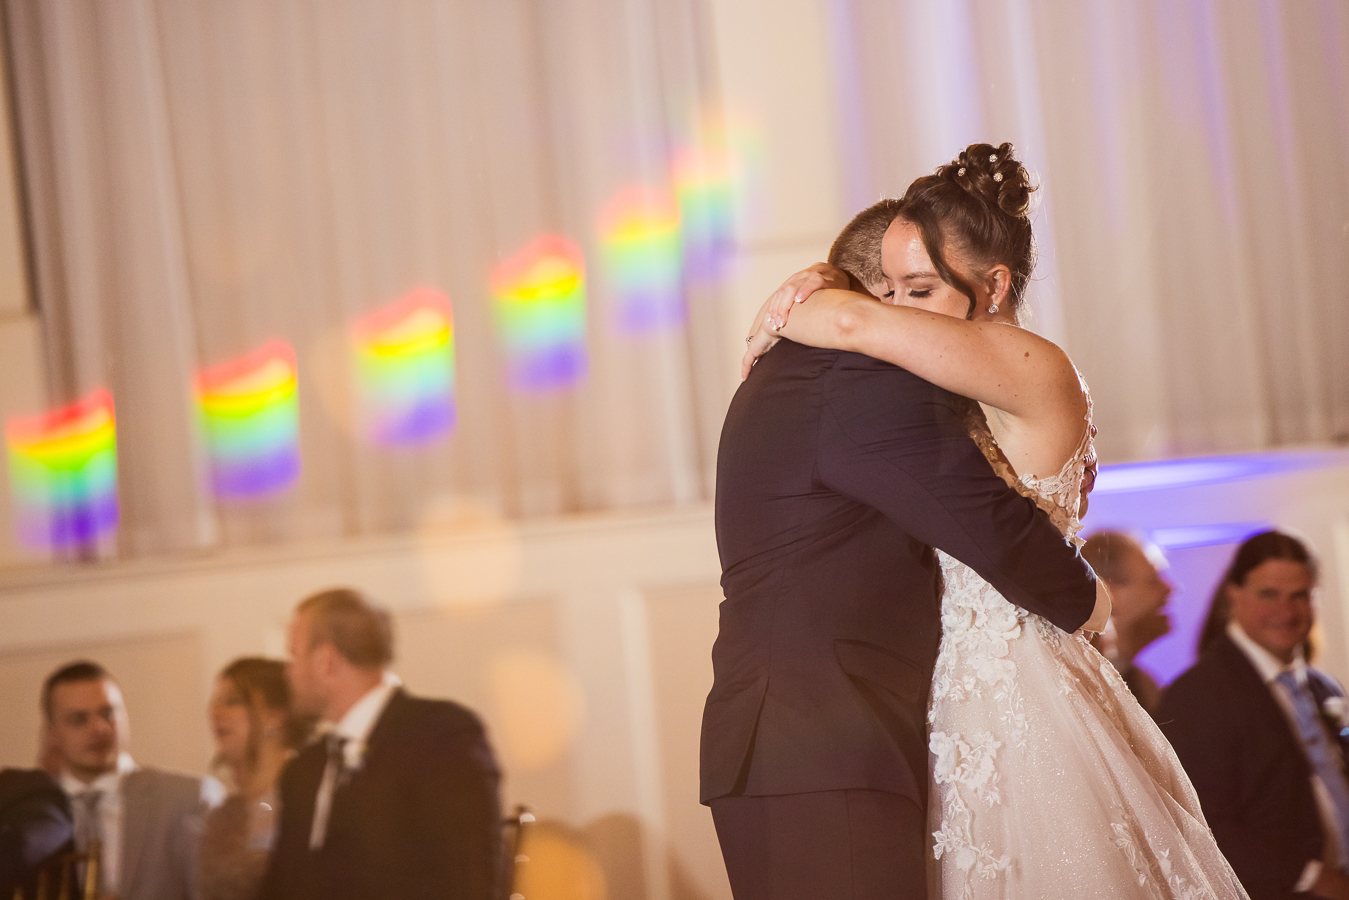 candid moment captured by wedding photographer, lisa rhinehart, as the bride and groom hug one another during their first dance together at their historical wedding venue in pennsylvania